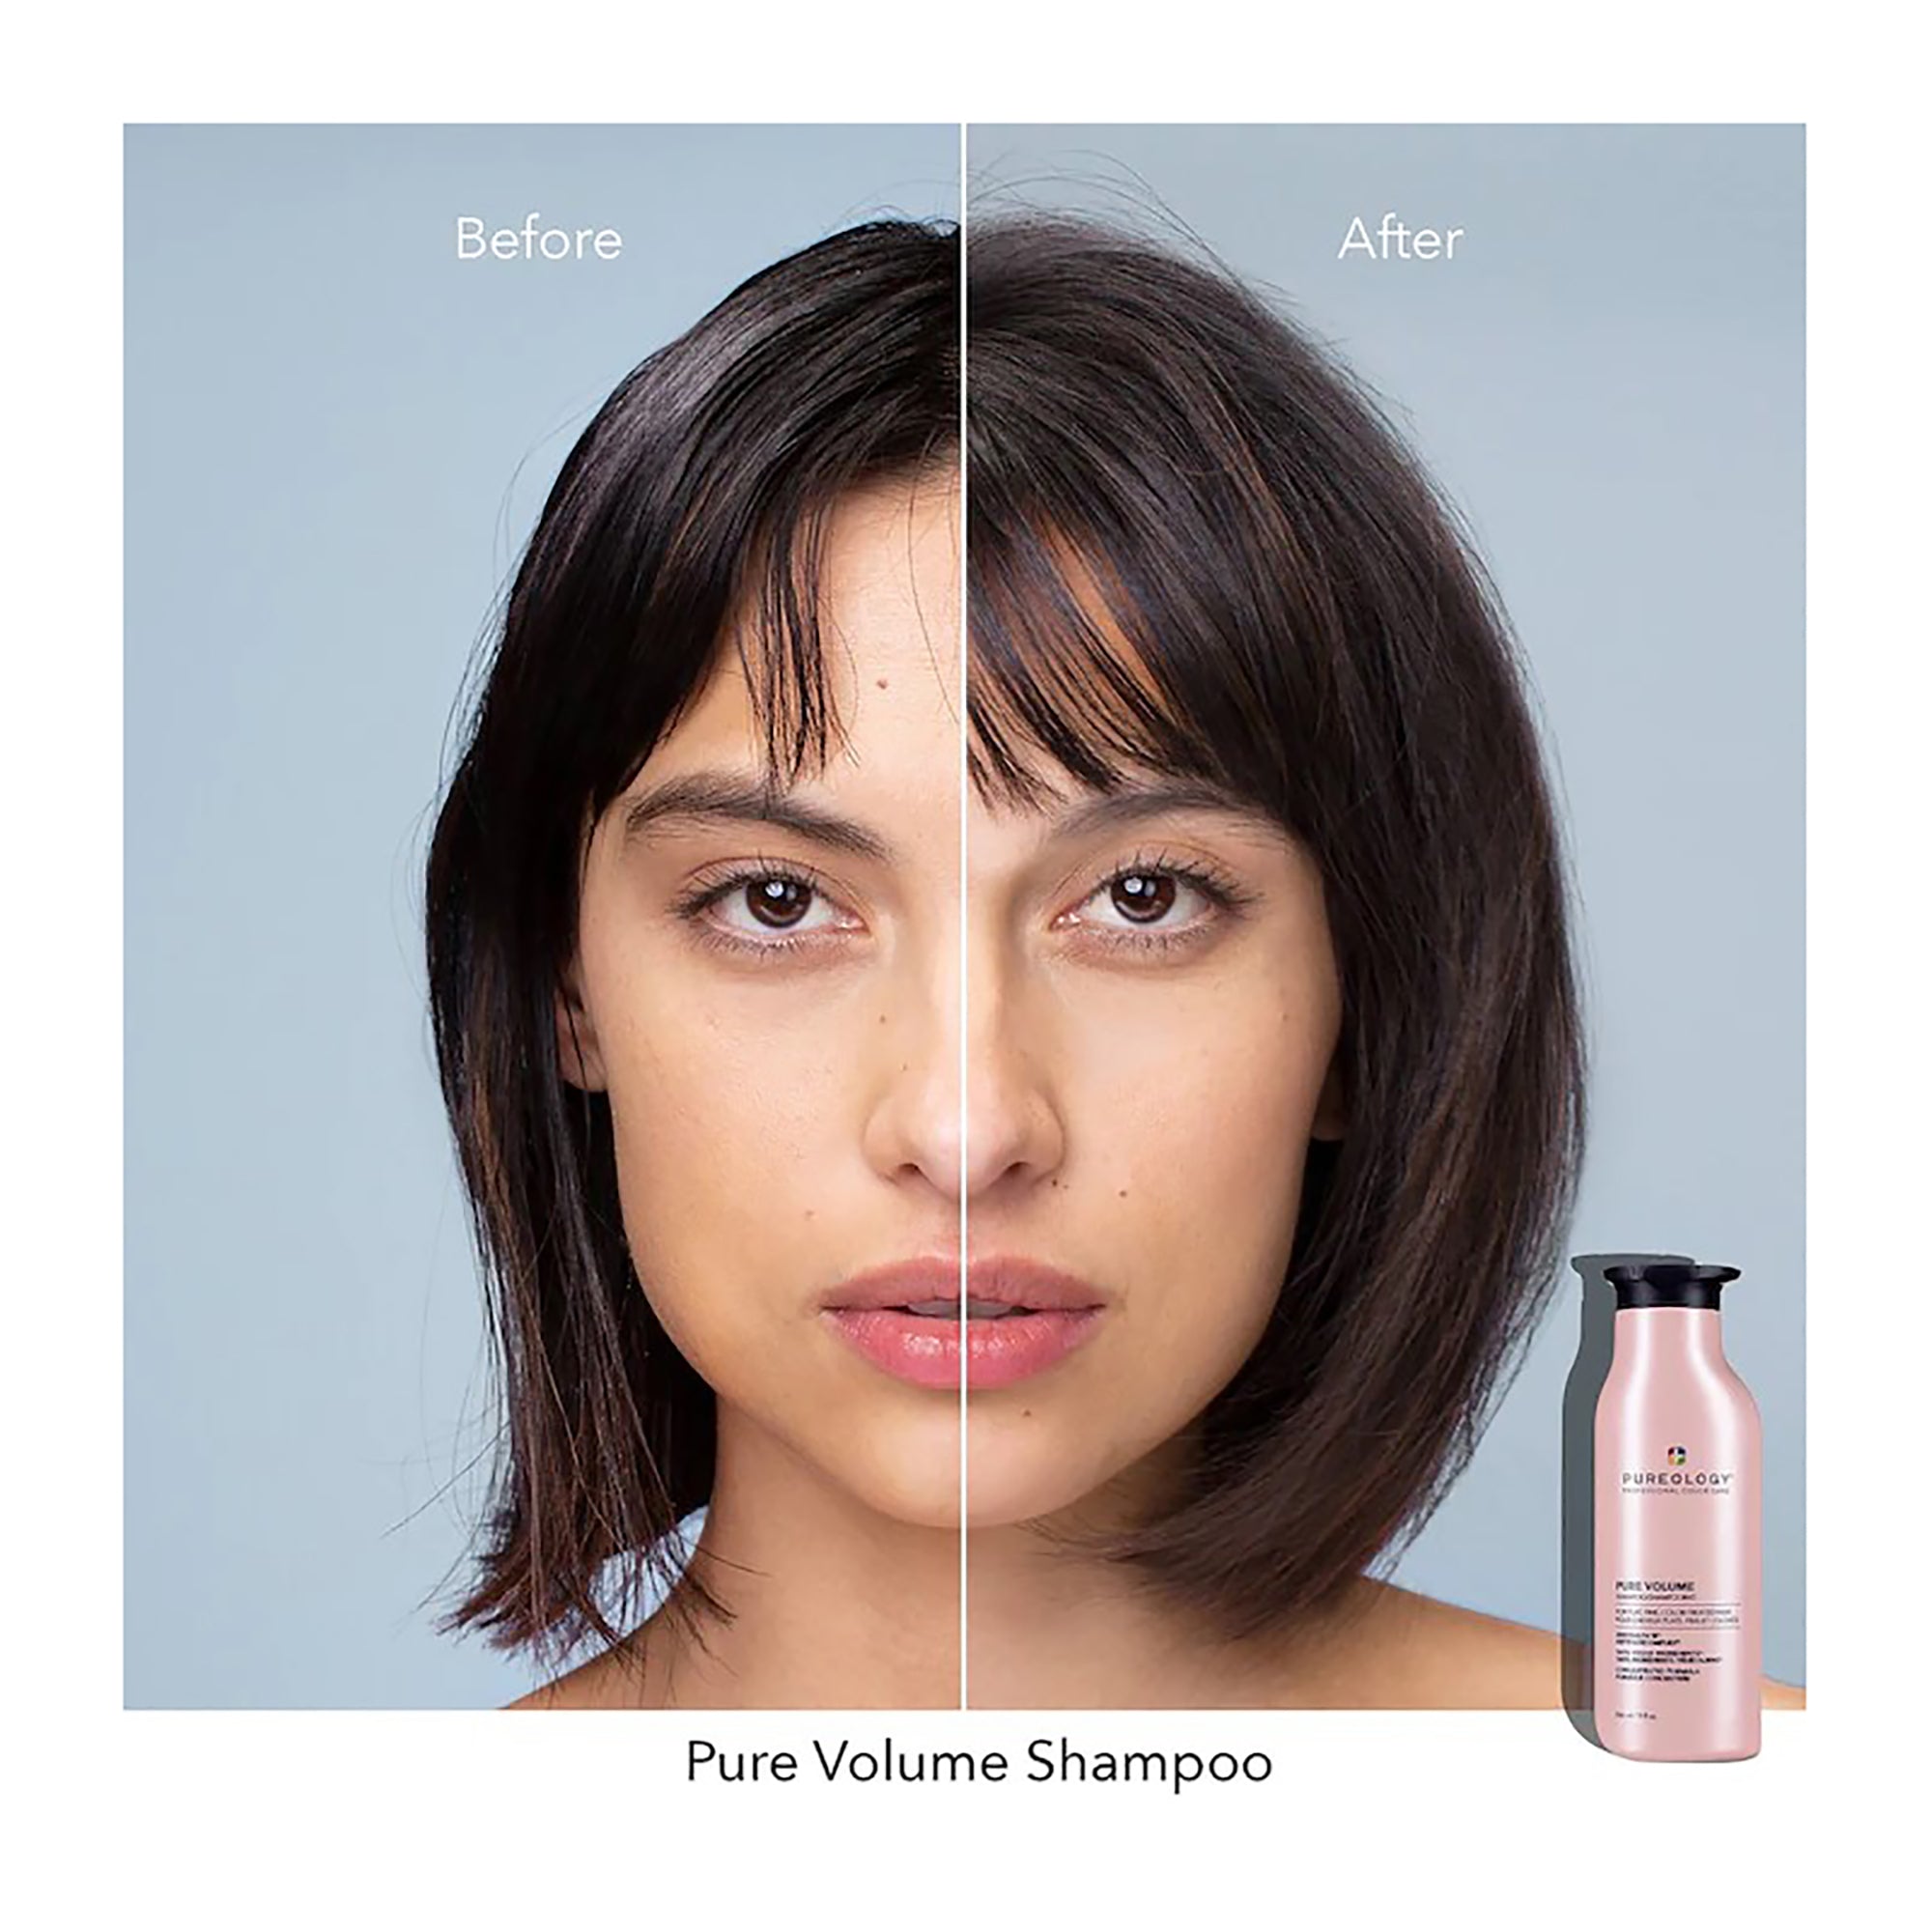 Pureology Pure Volume Shampoo and Conditioner Duo / 33OZ